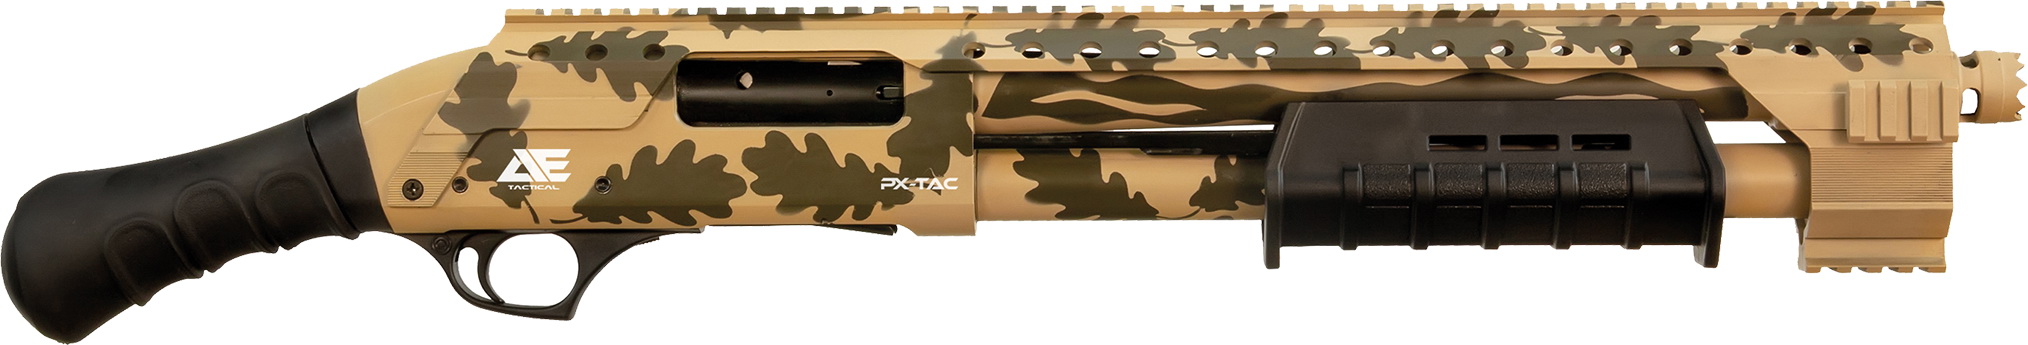 AE TACTICAL PX TAC 118